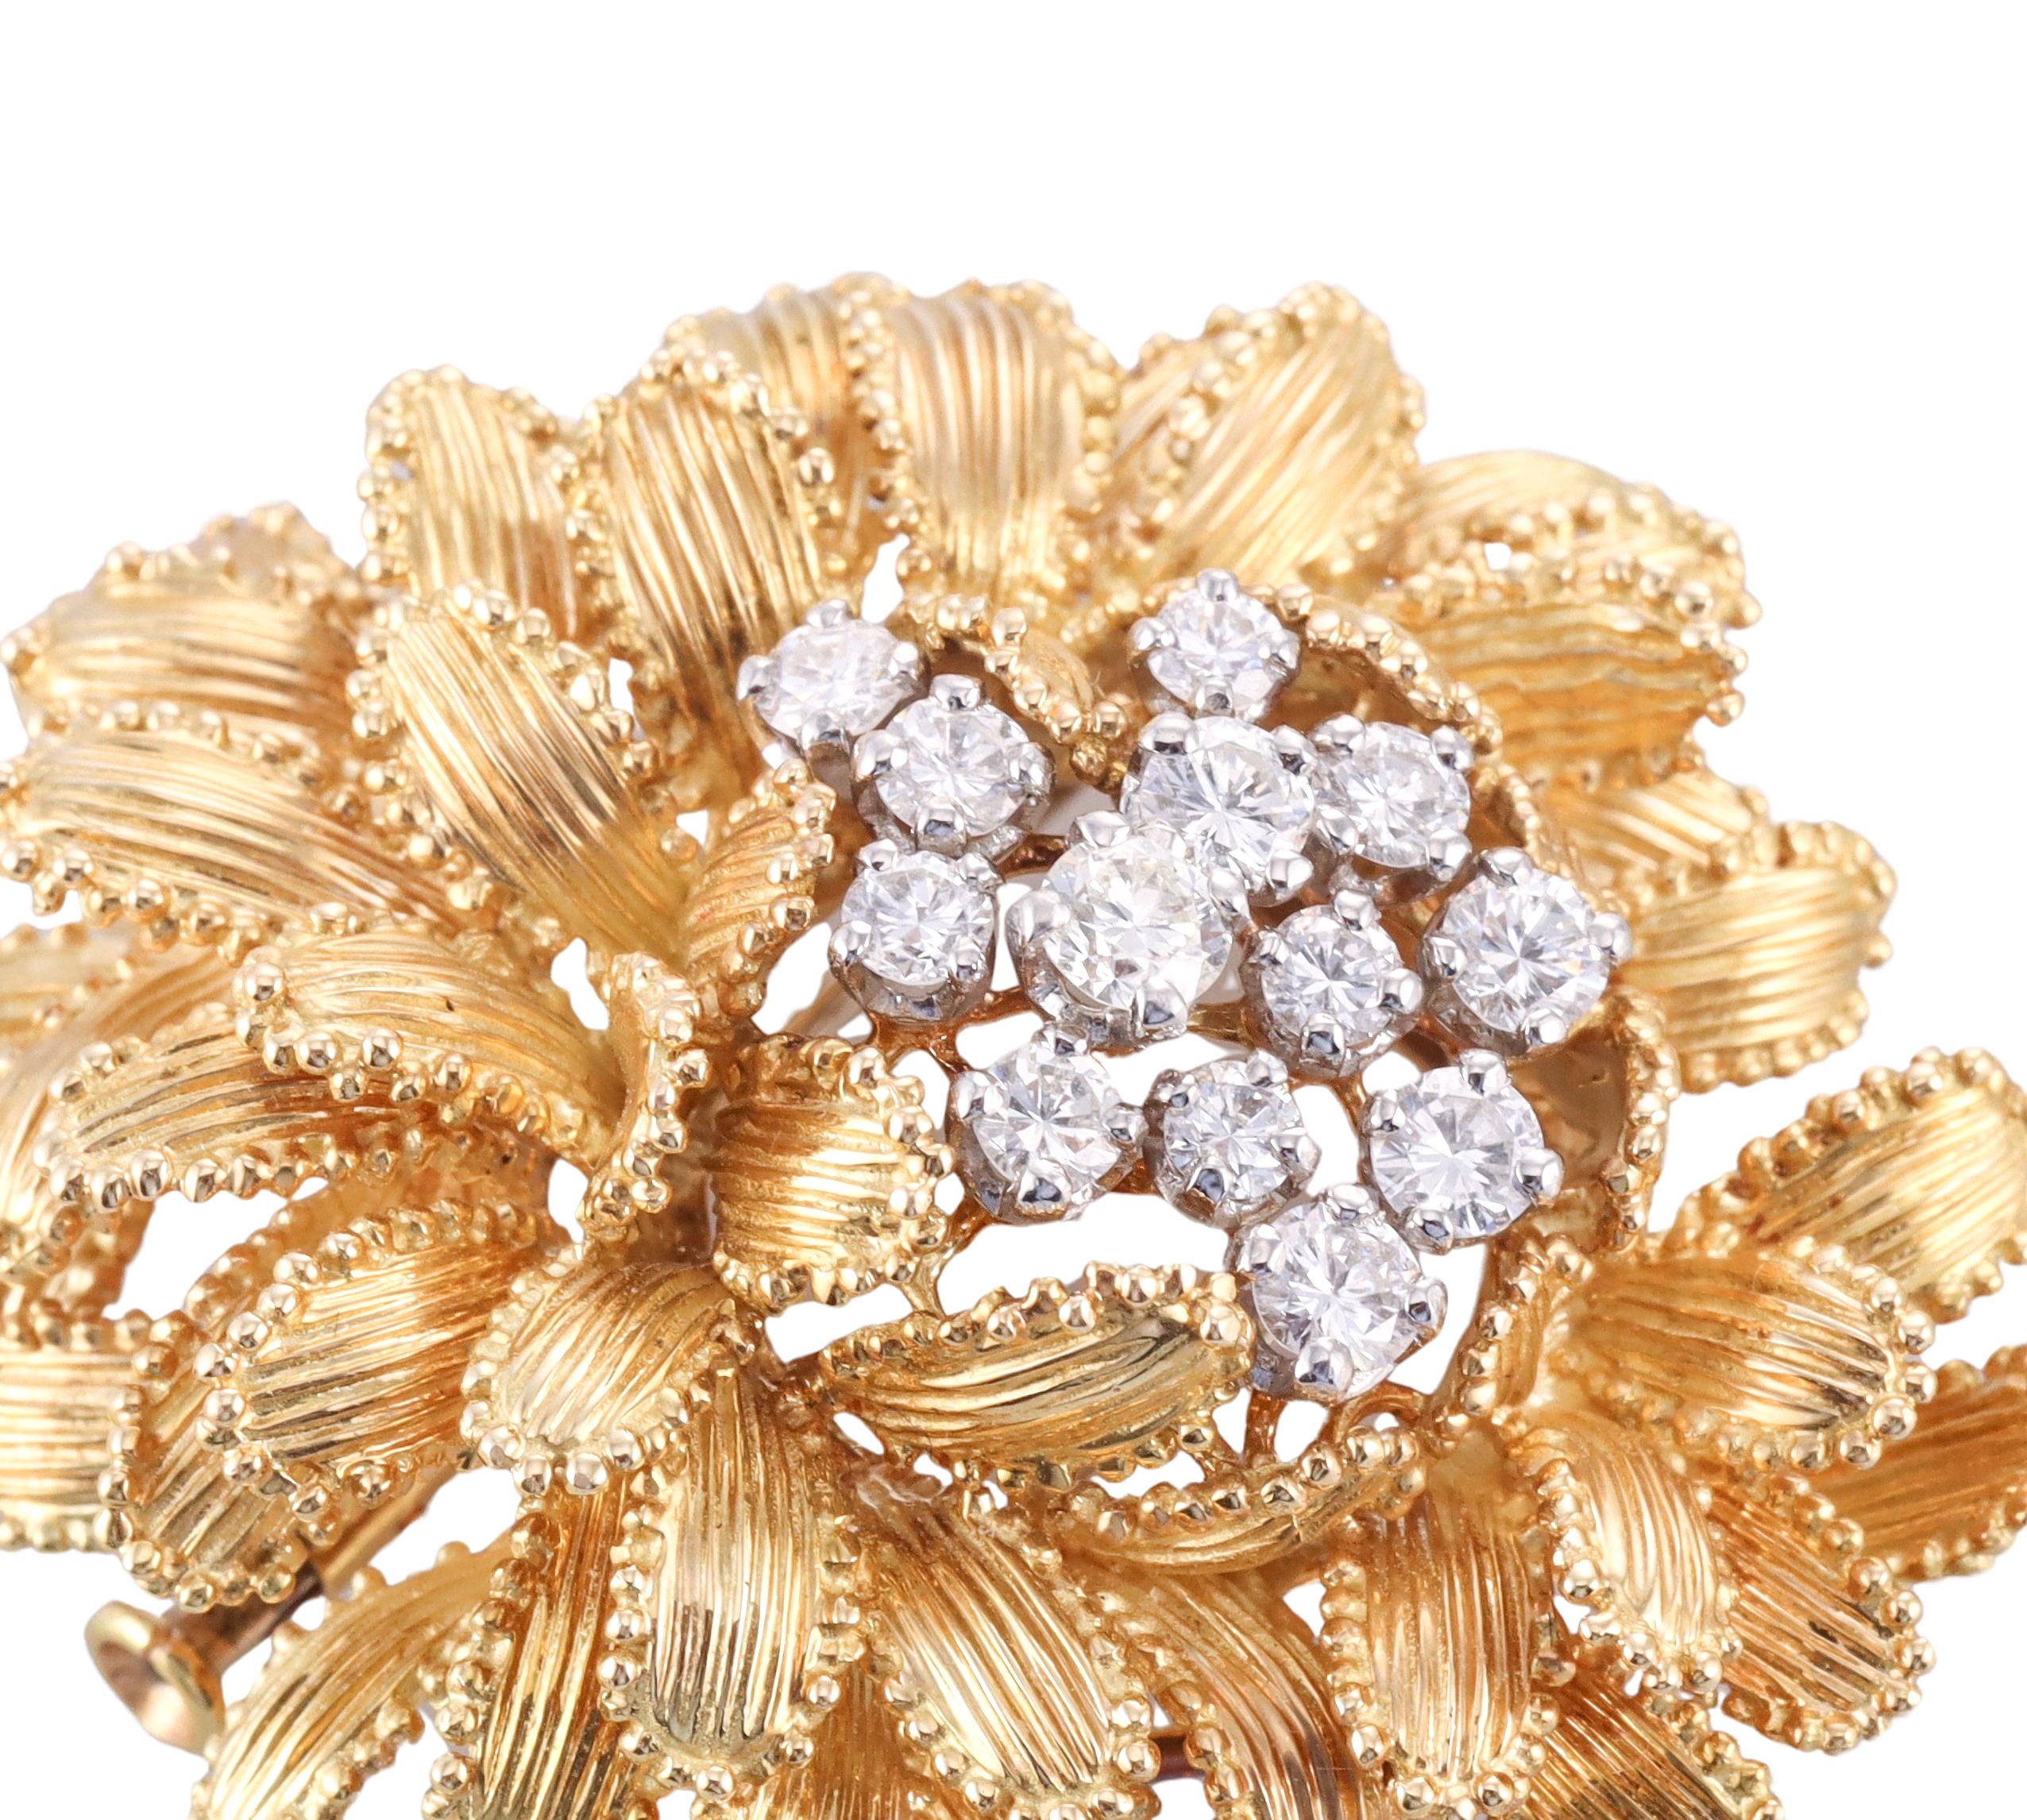 Vintage, circa 1970s Gubelin made flower brooch, set in 18k yellow gold, adorned with approximately 0.80ctw G/VS diamonds. Brooch measures 1.75